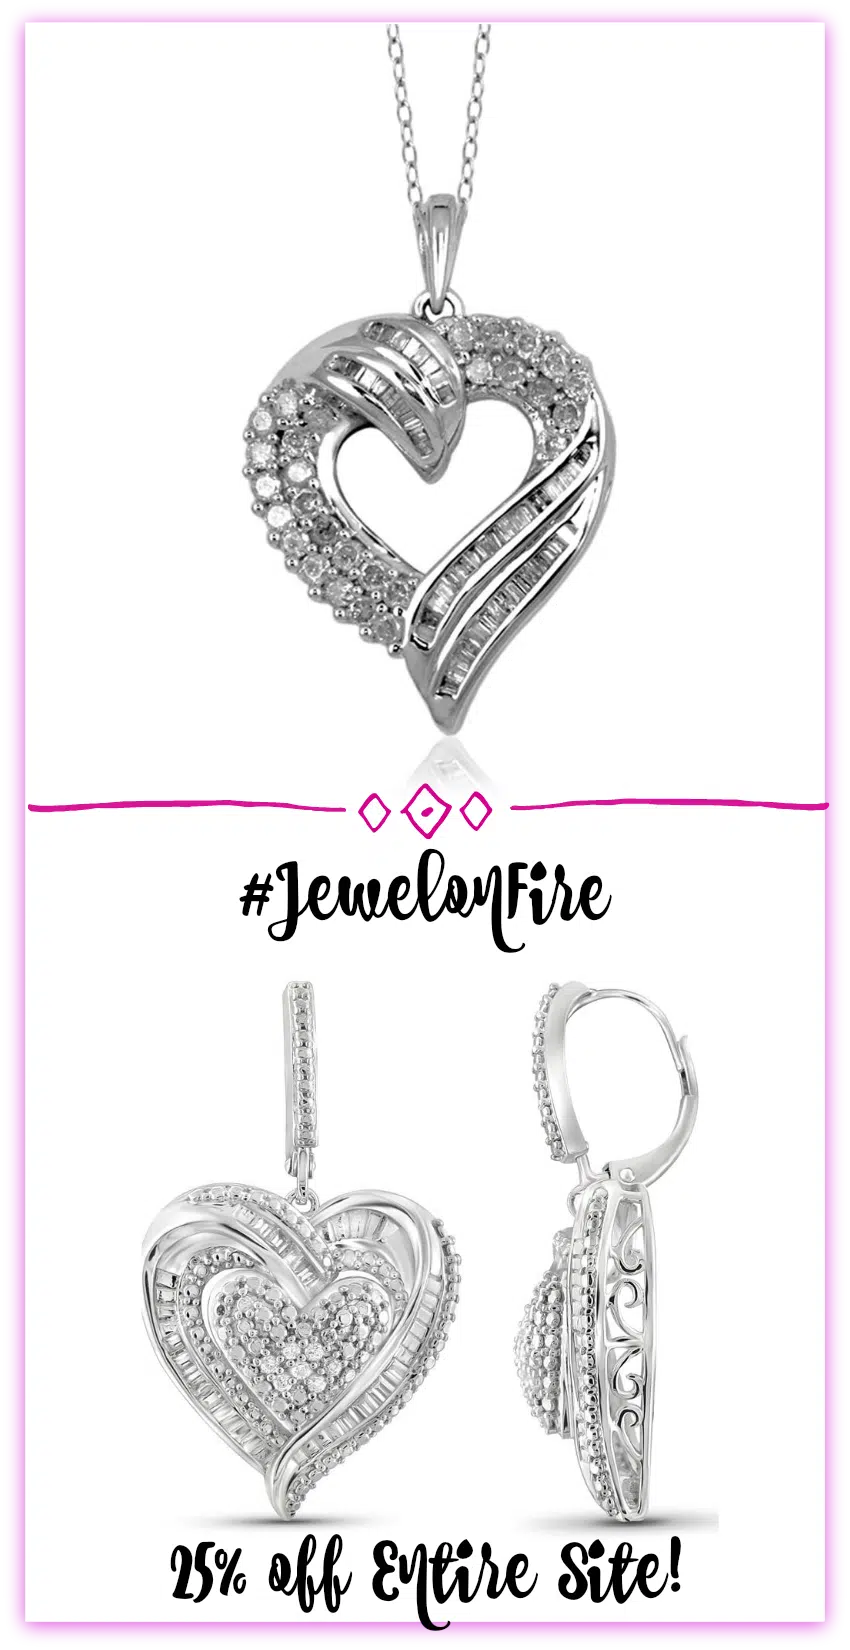 Save 25% on entire site #JewelonFire #ad 